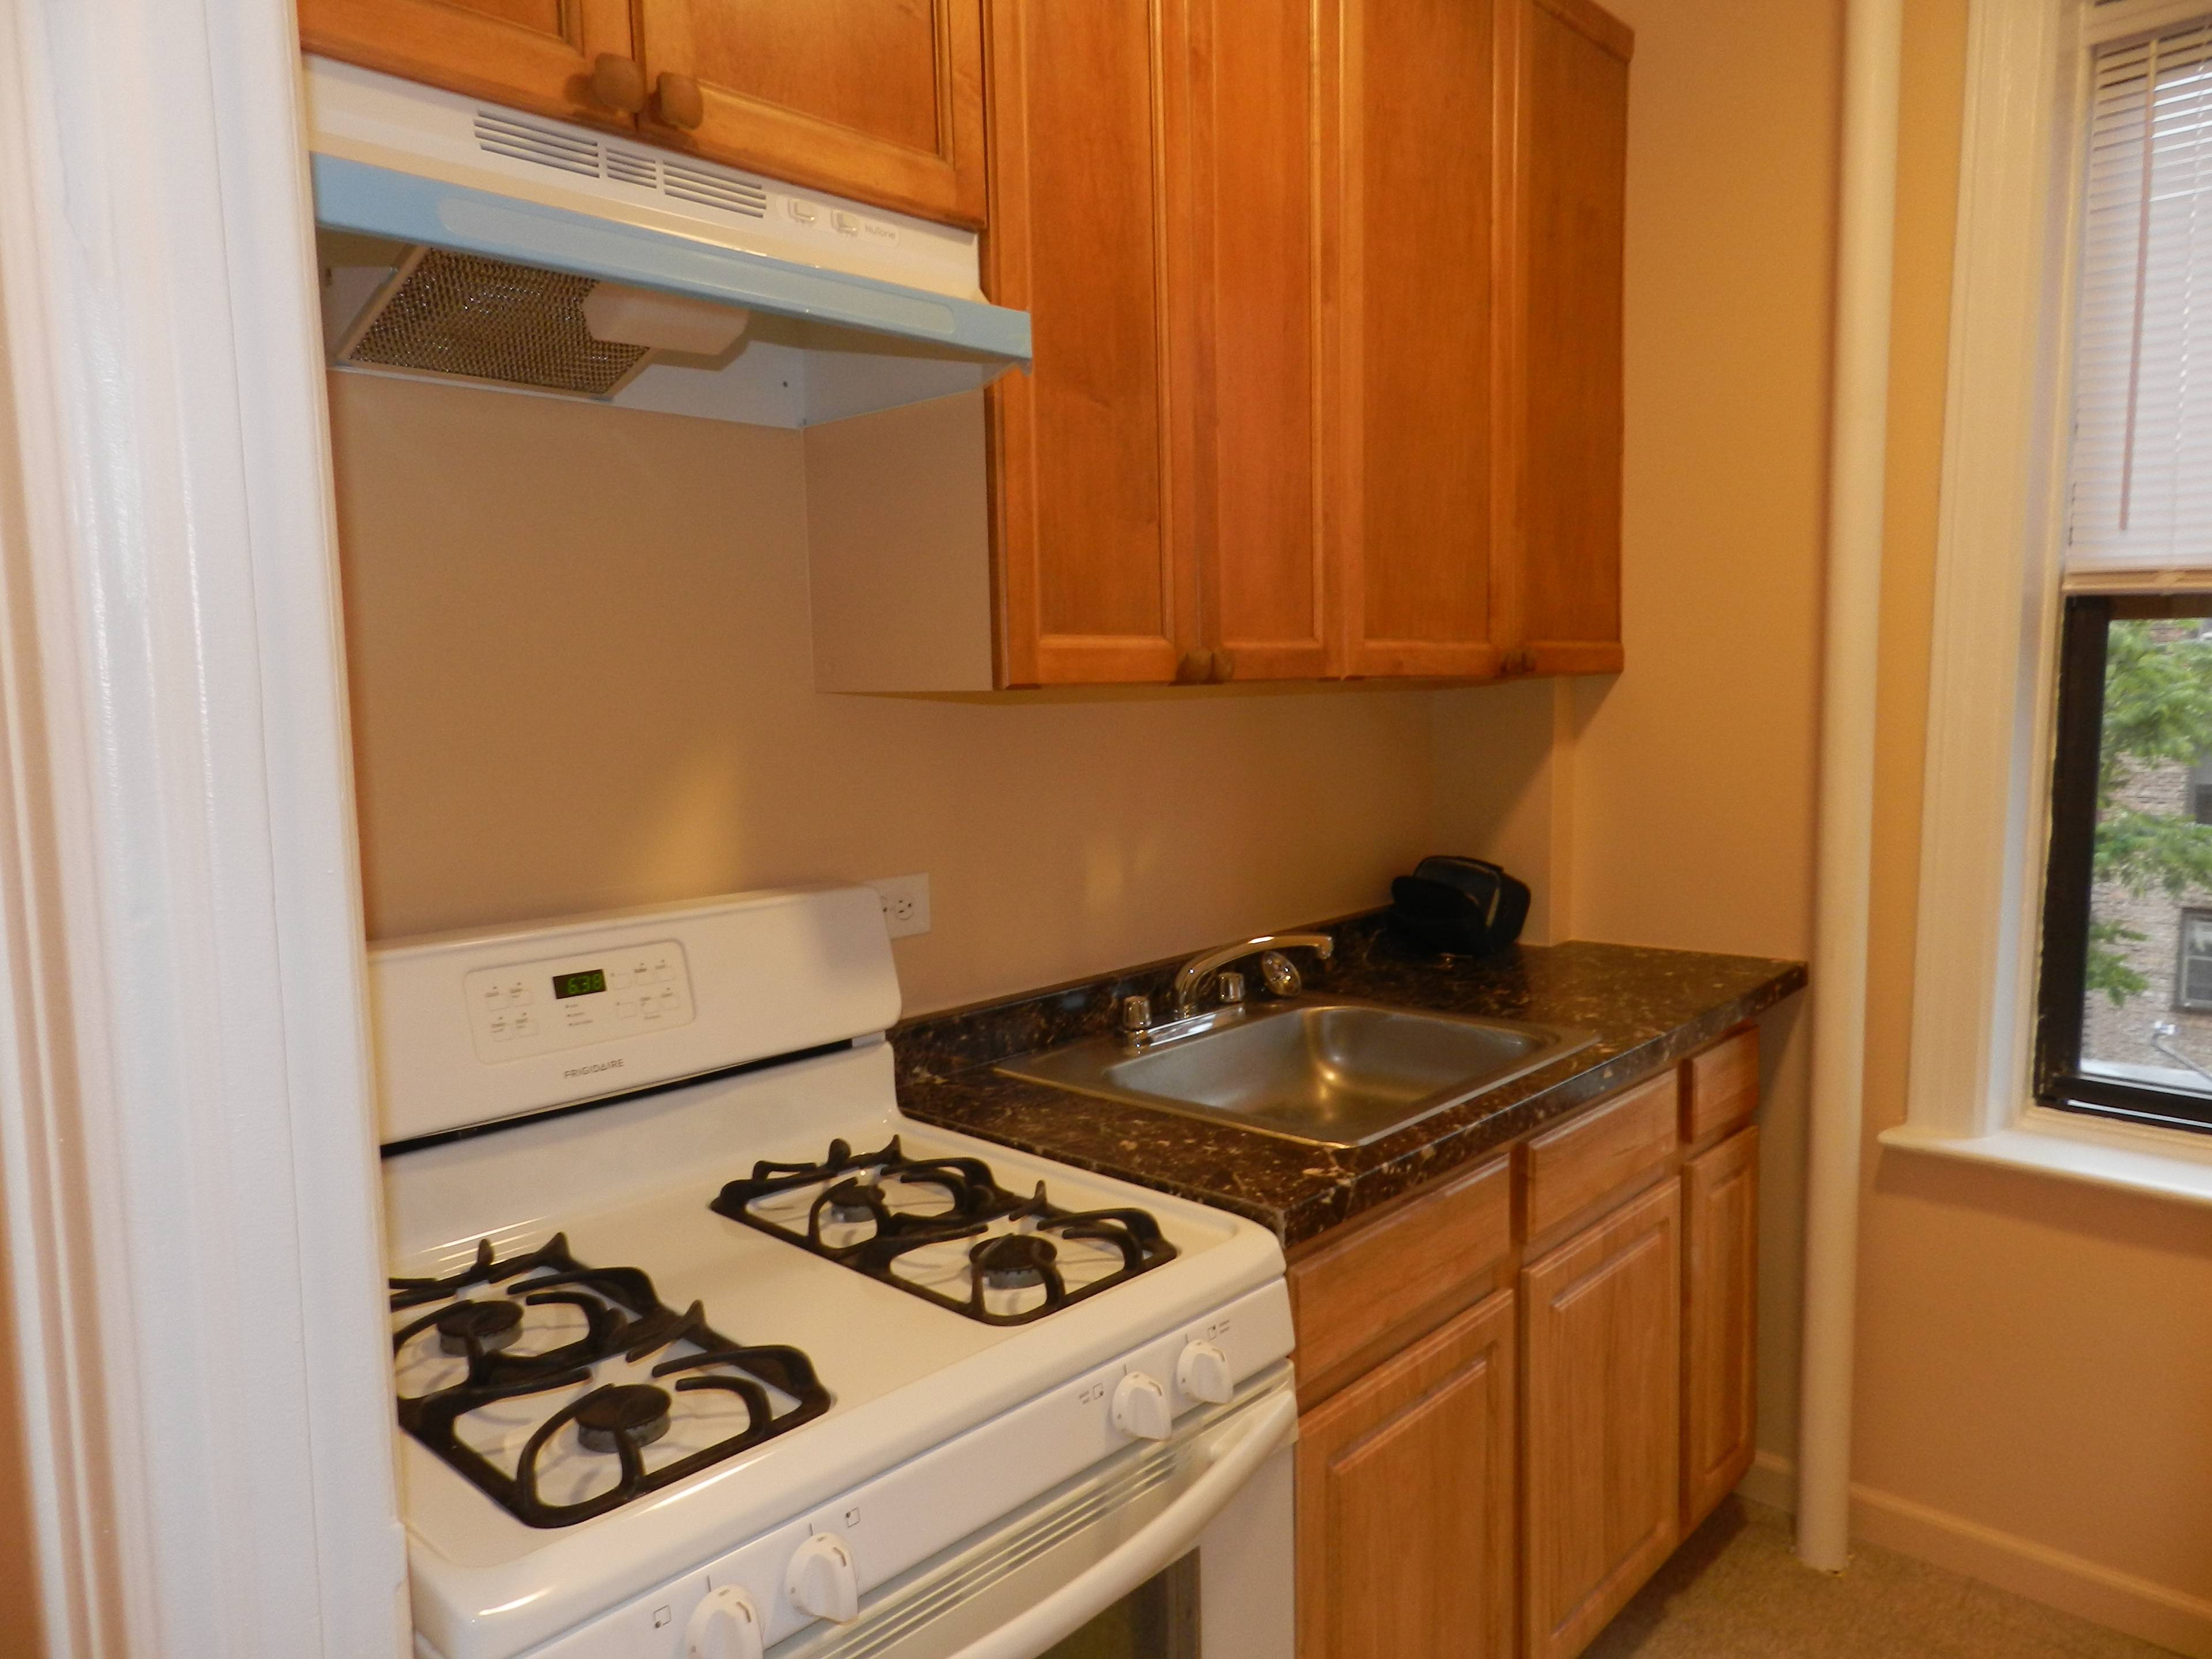 Amazing and Large 1 Bedroom Apartment in Sunnyside - 3 Blocks from 7 Train!!!